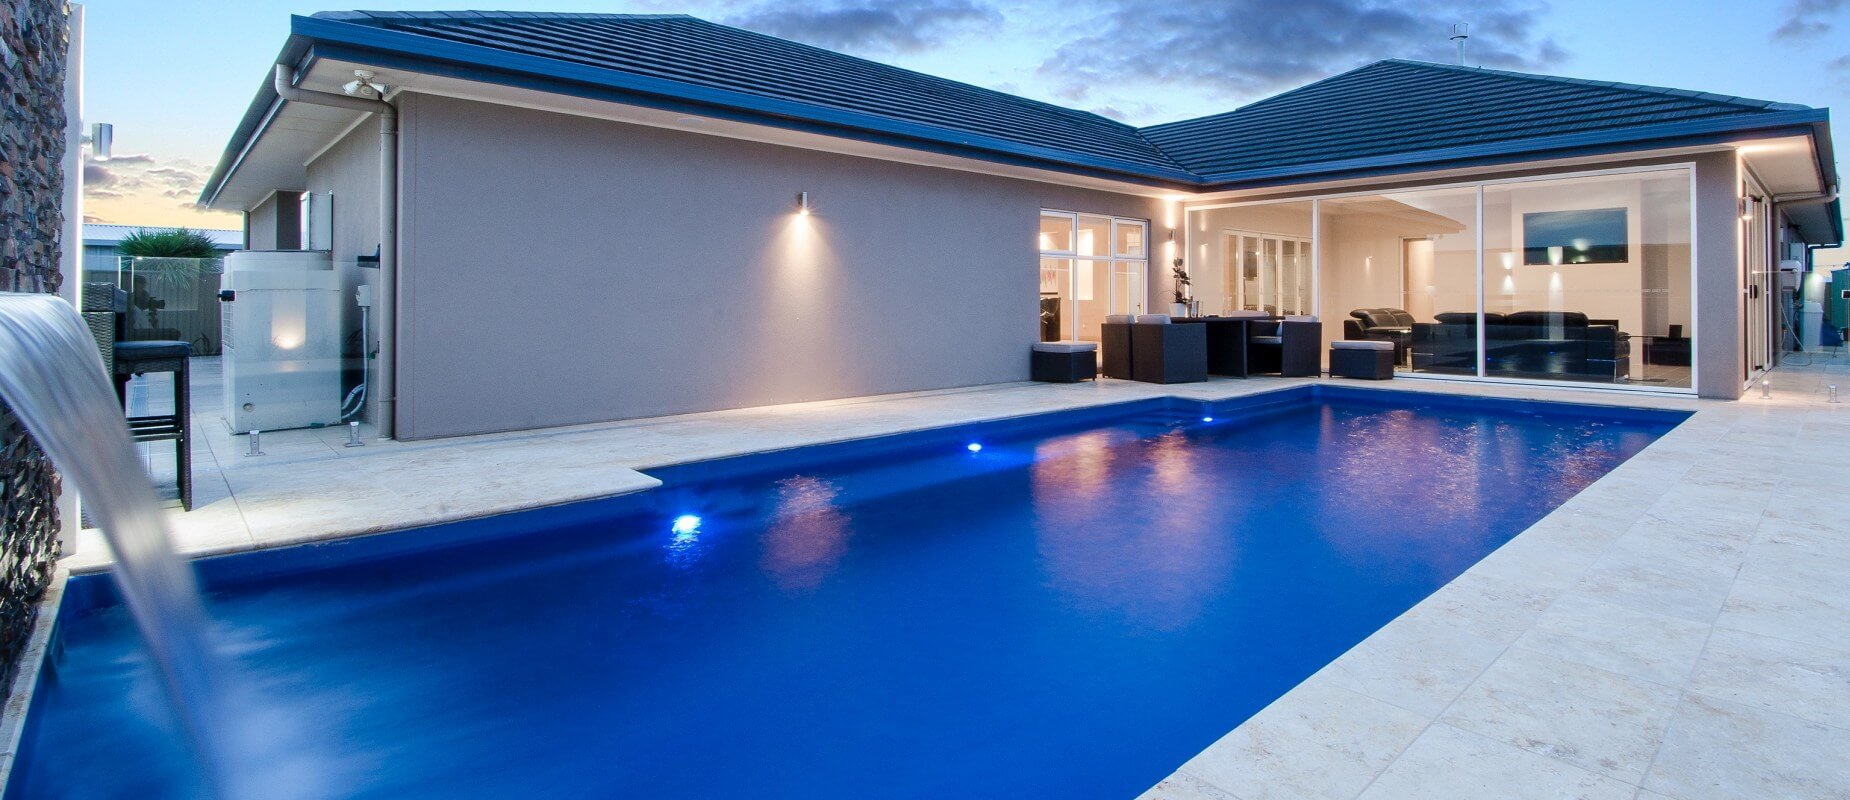 015-Compass-Pools-Australia_Vogue-family-pool-with-water-wall-feature-and-pool-lights-on